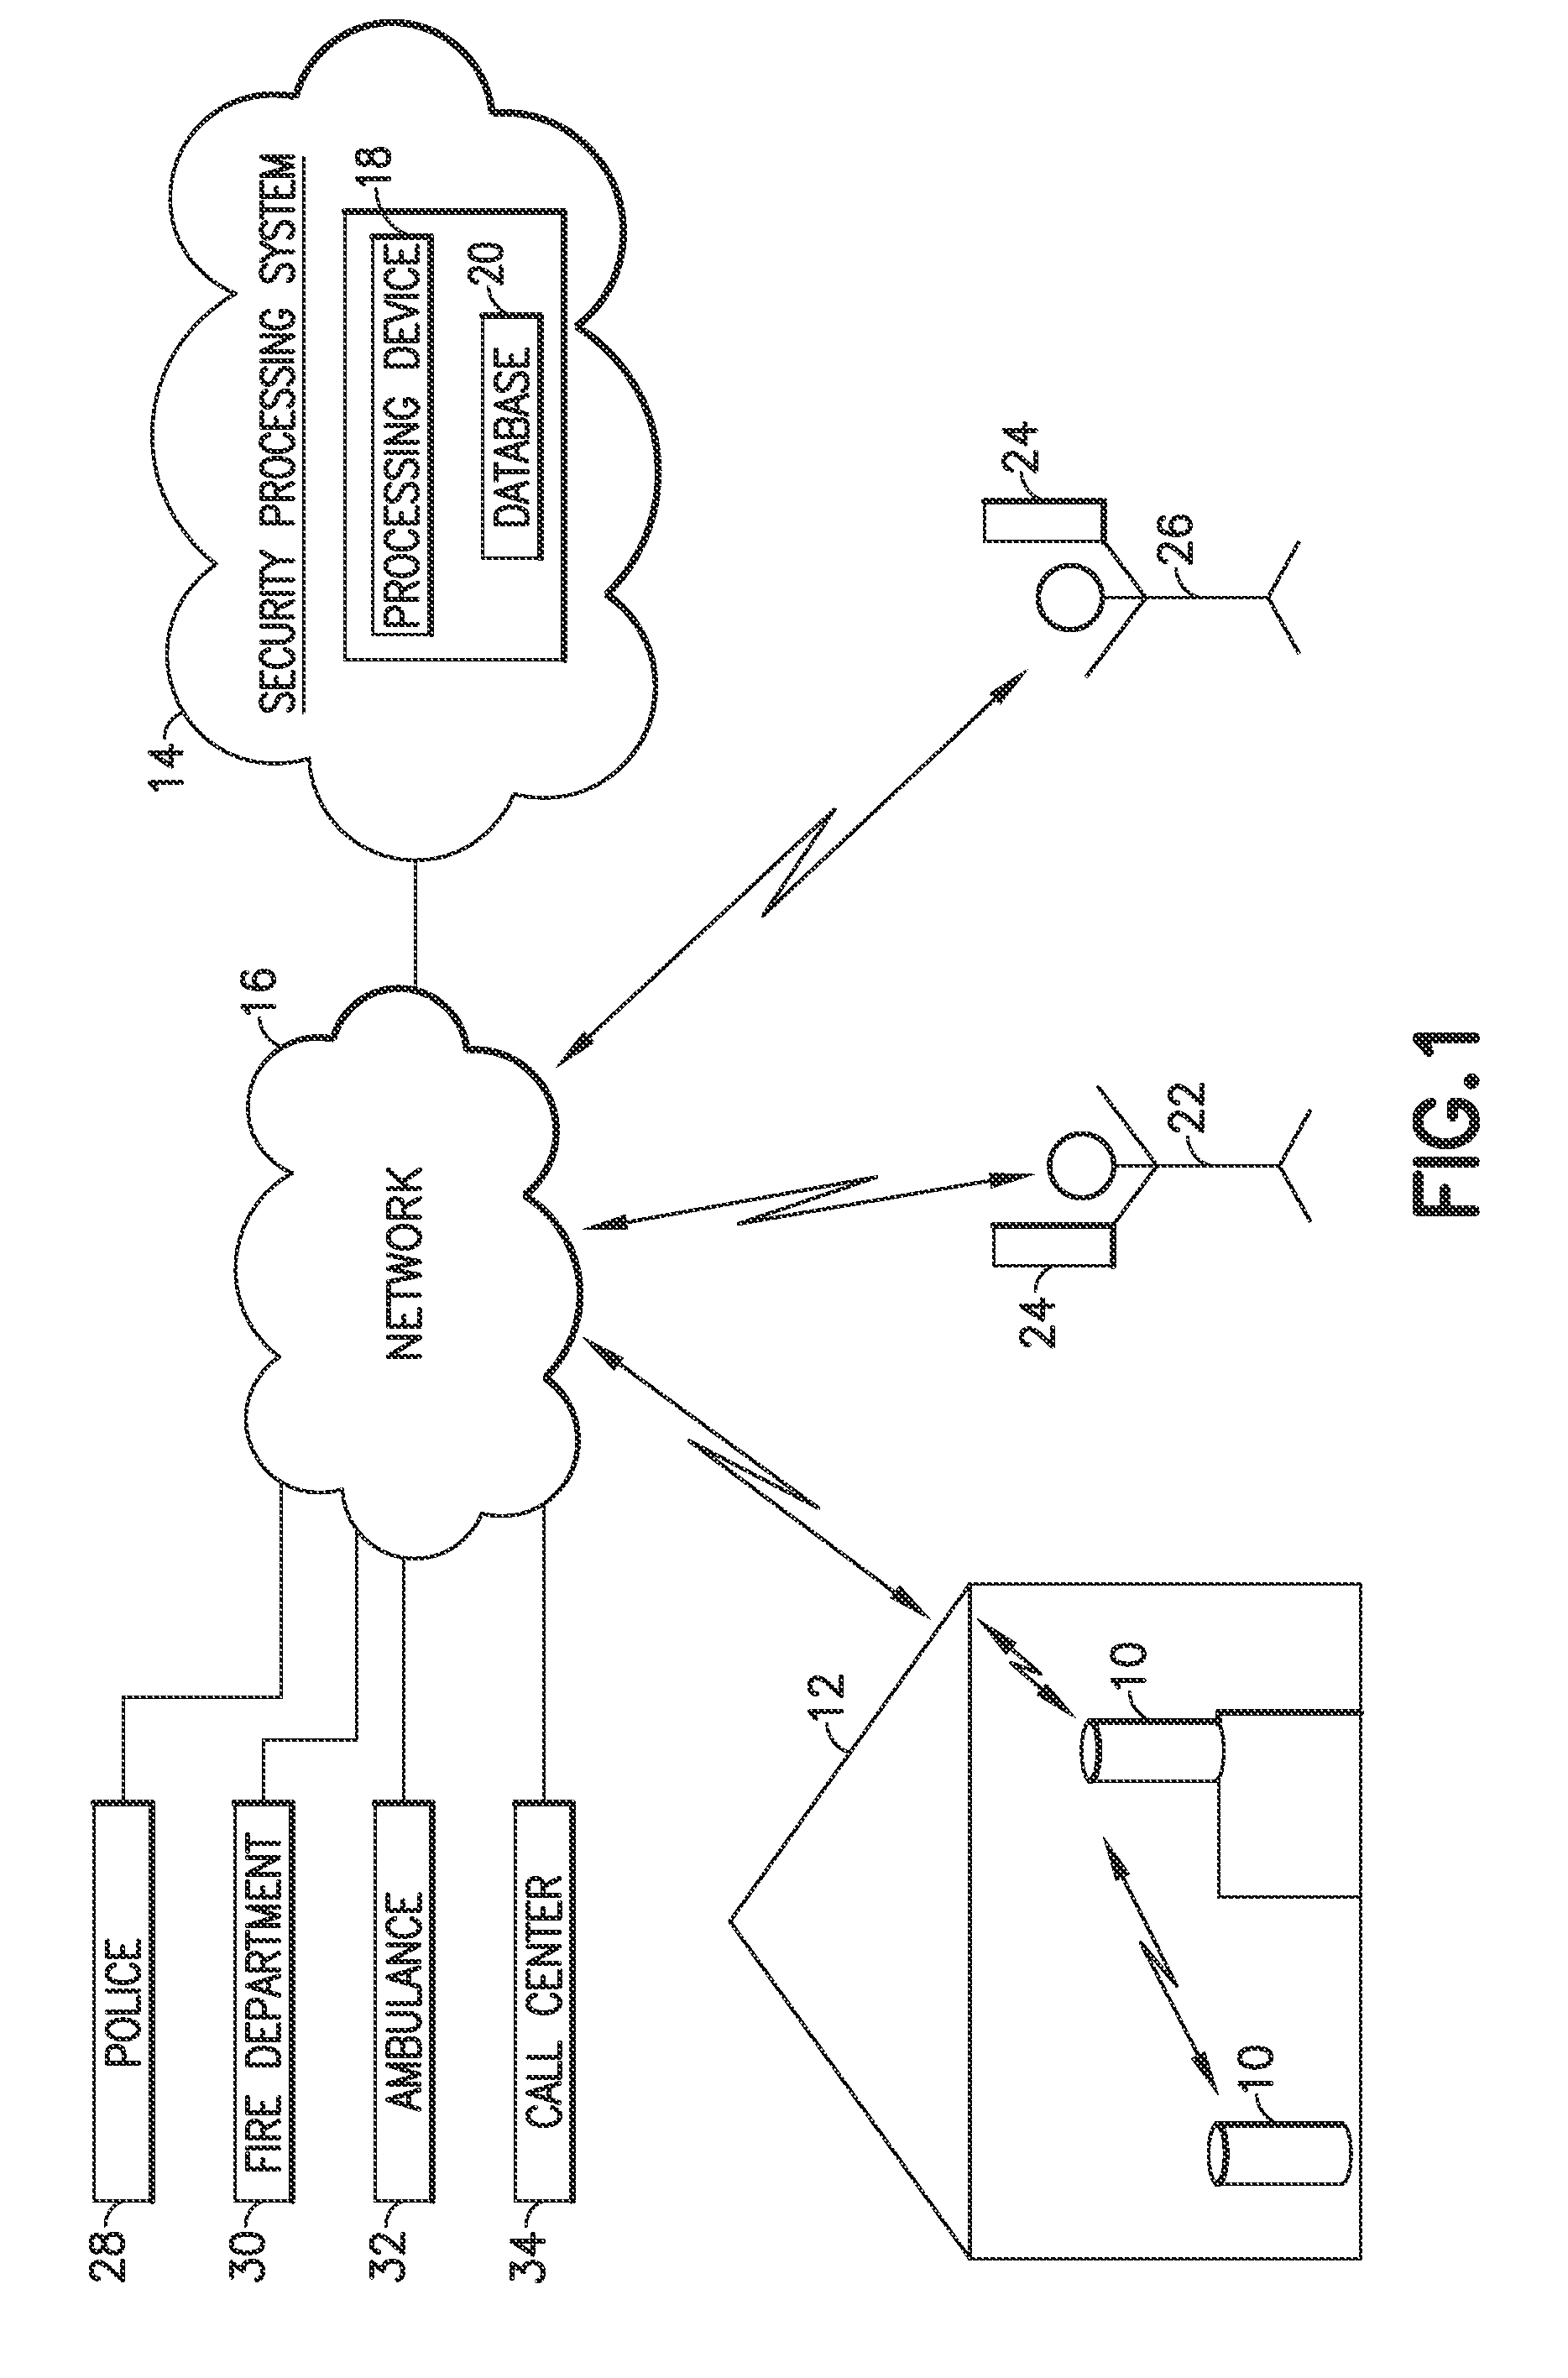 Monitoring and security devices comprising multiple sensors